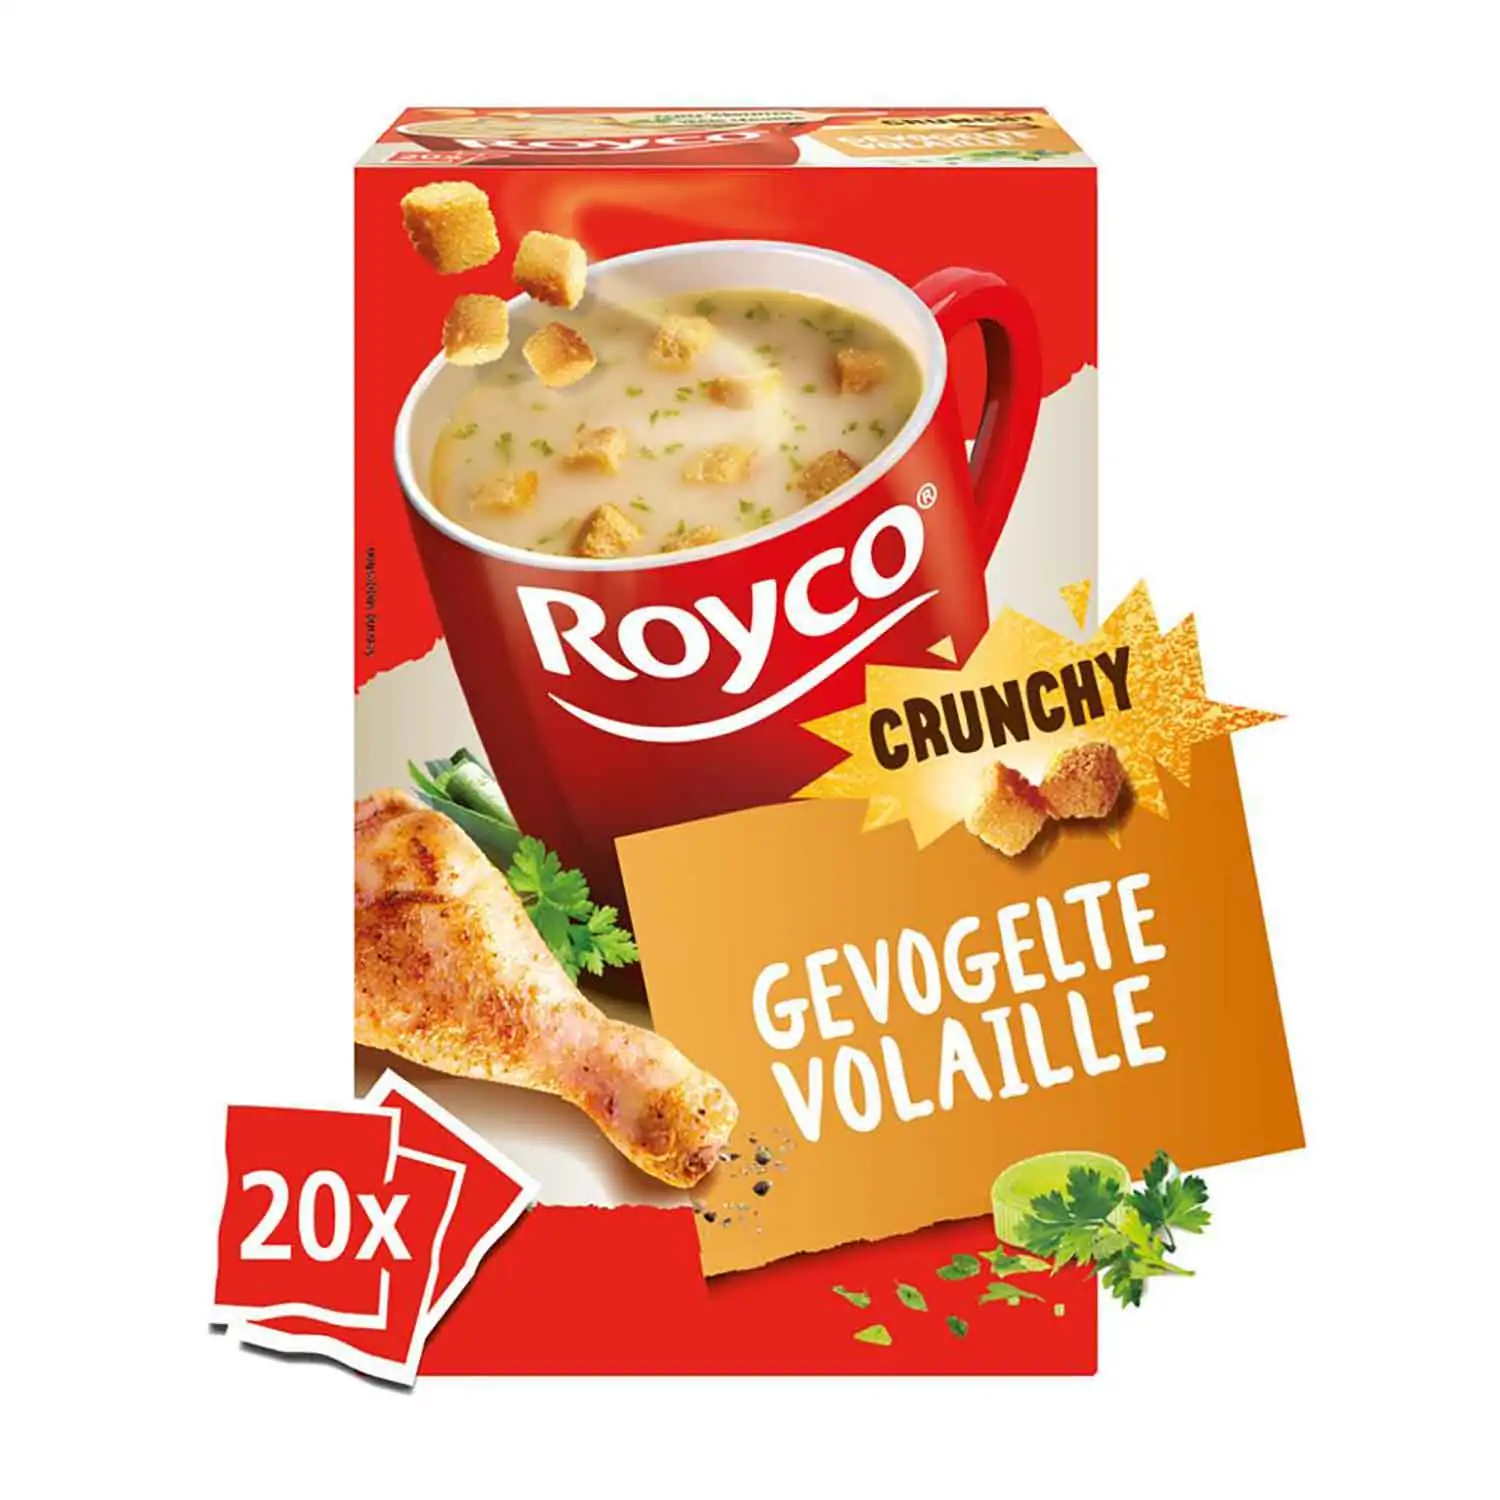 20x Royco crunchy poultry 20,5g - Buy at Real Tobacco